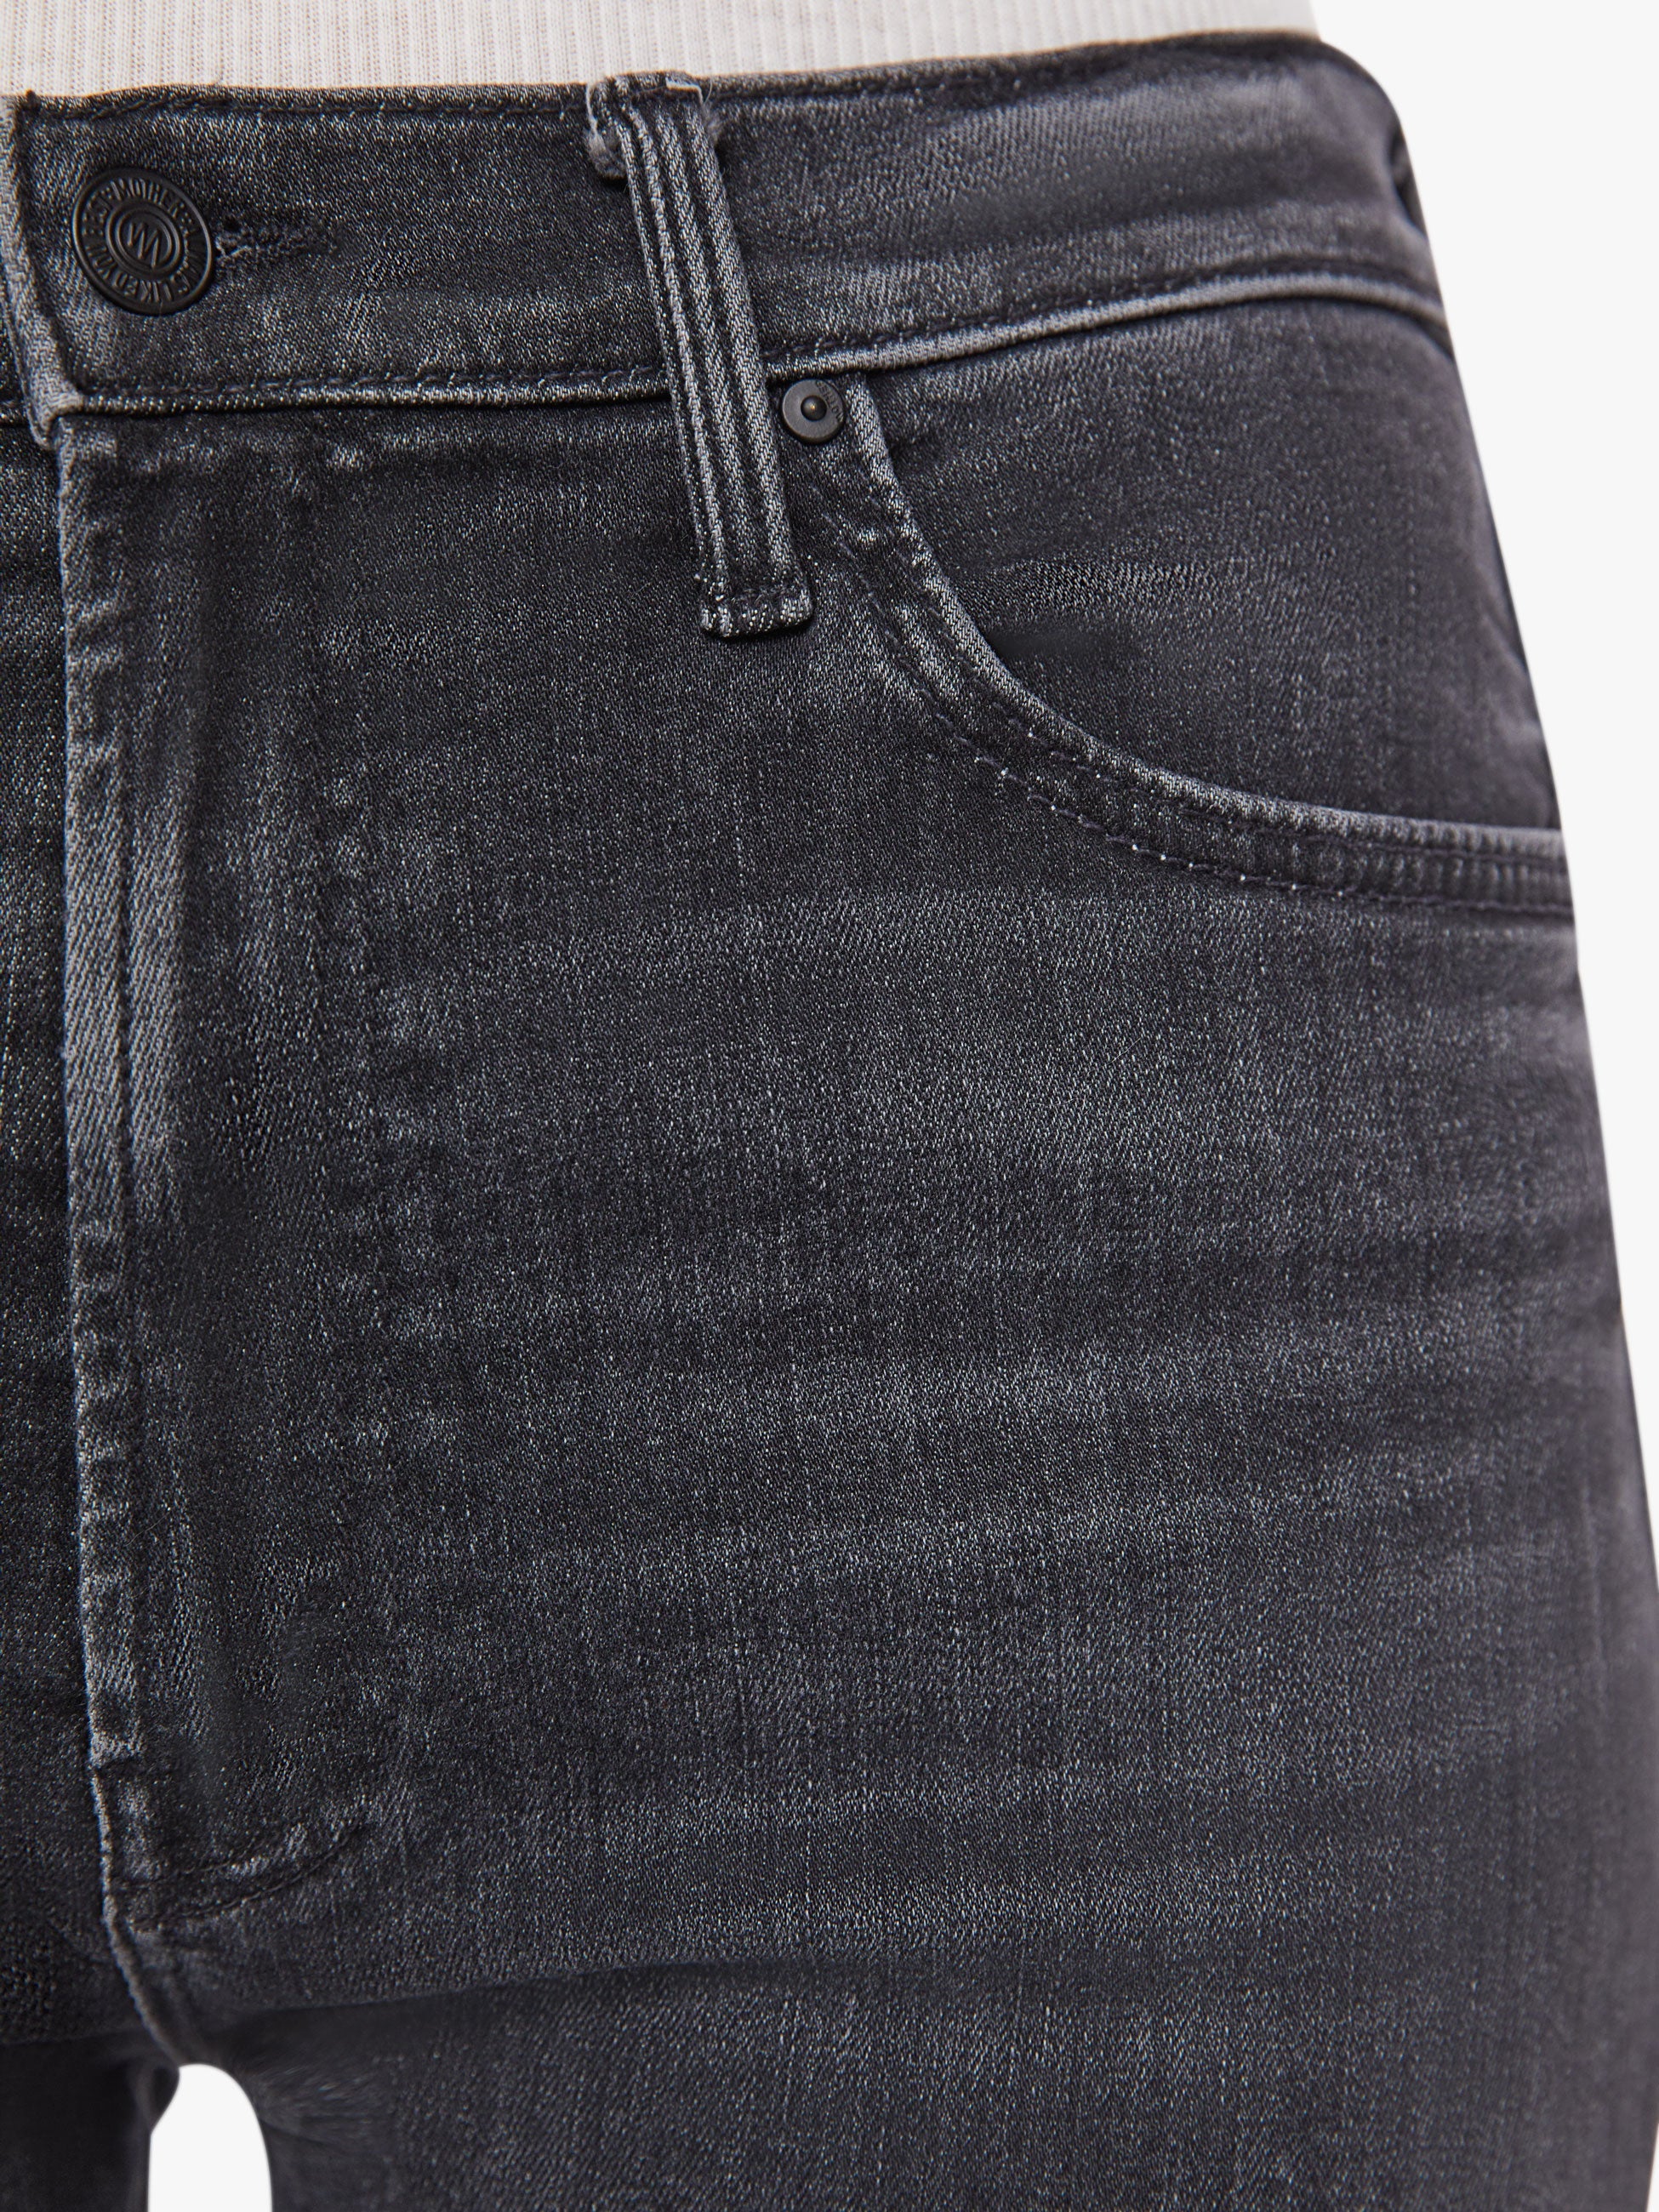 Ditcher Zip Ankle Jean - Smoking Section